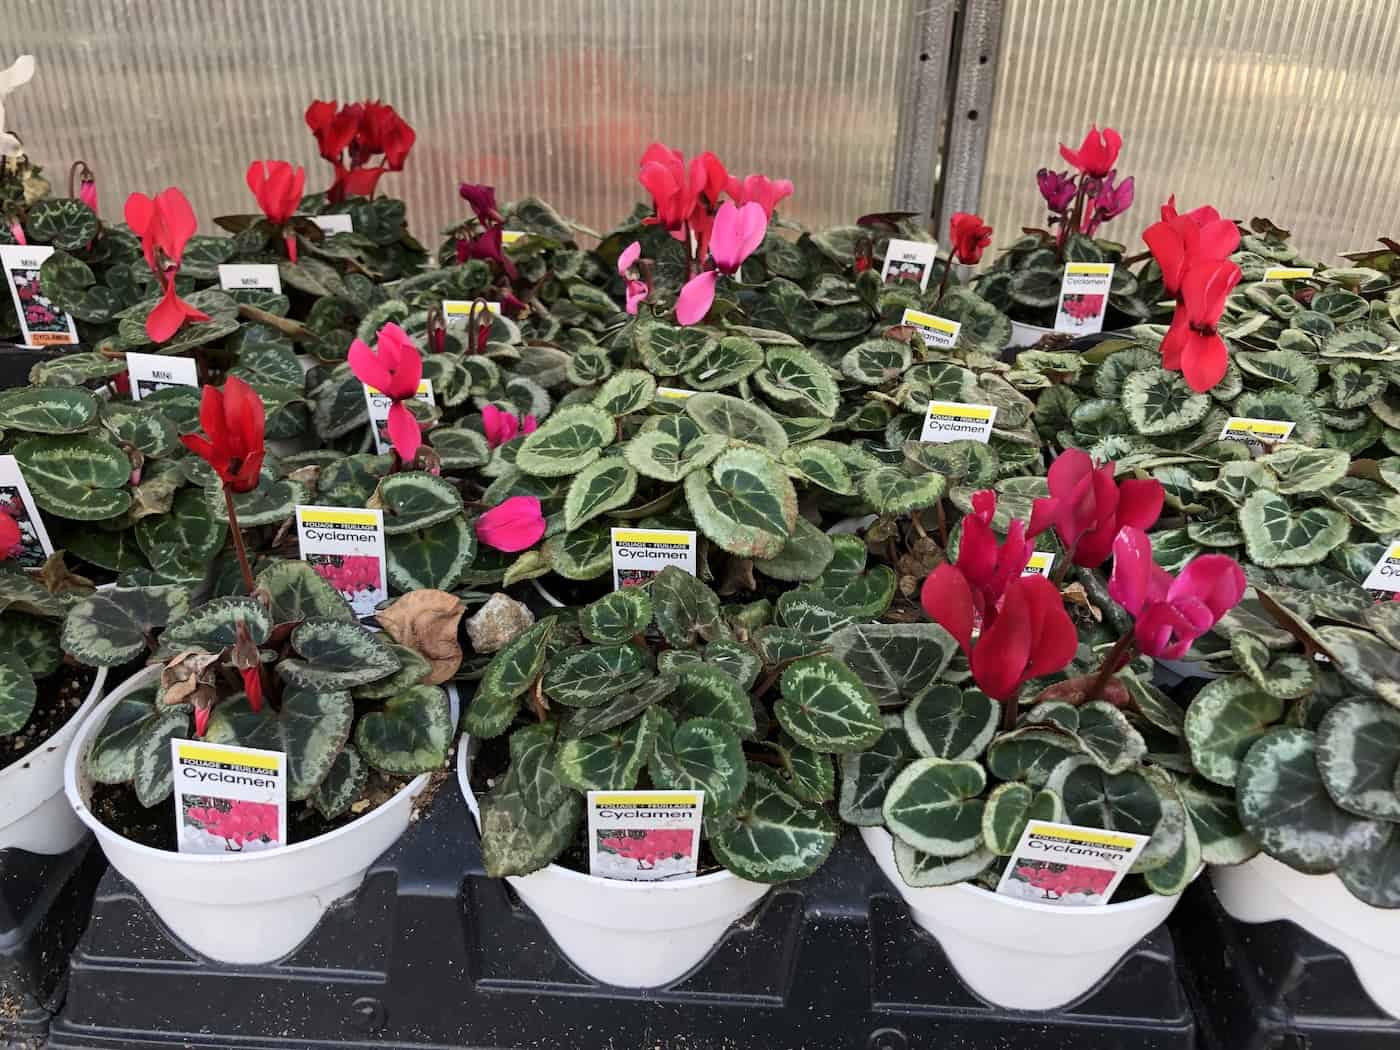 Cyclamen plants - red and pink